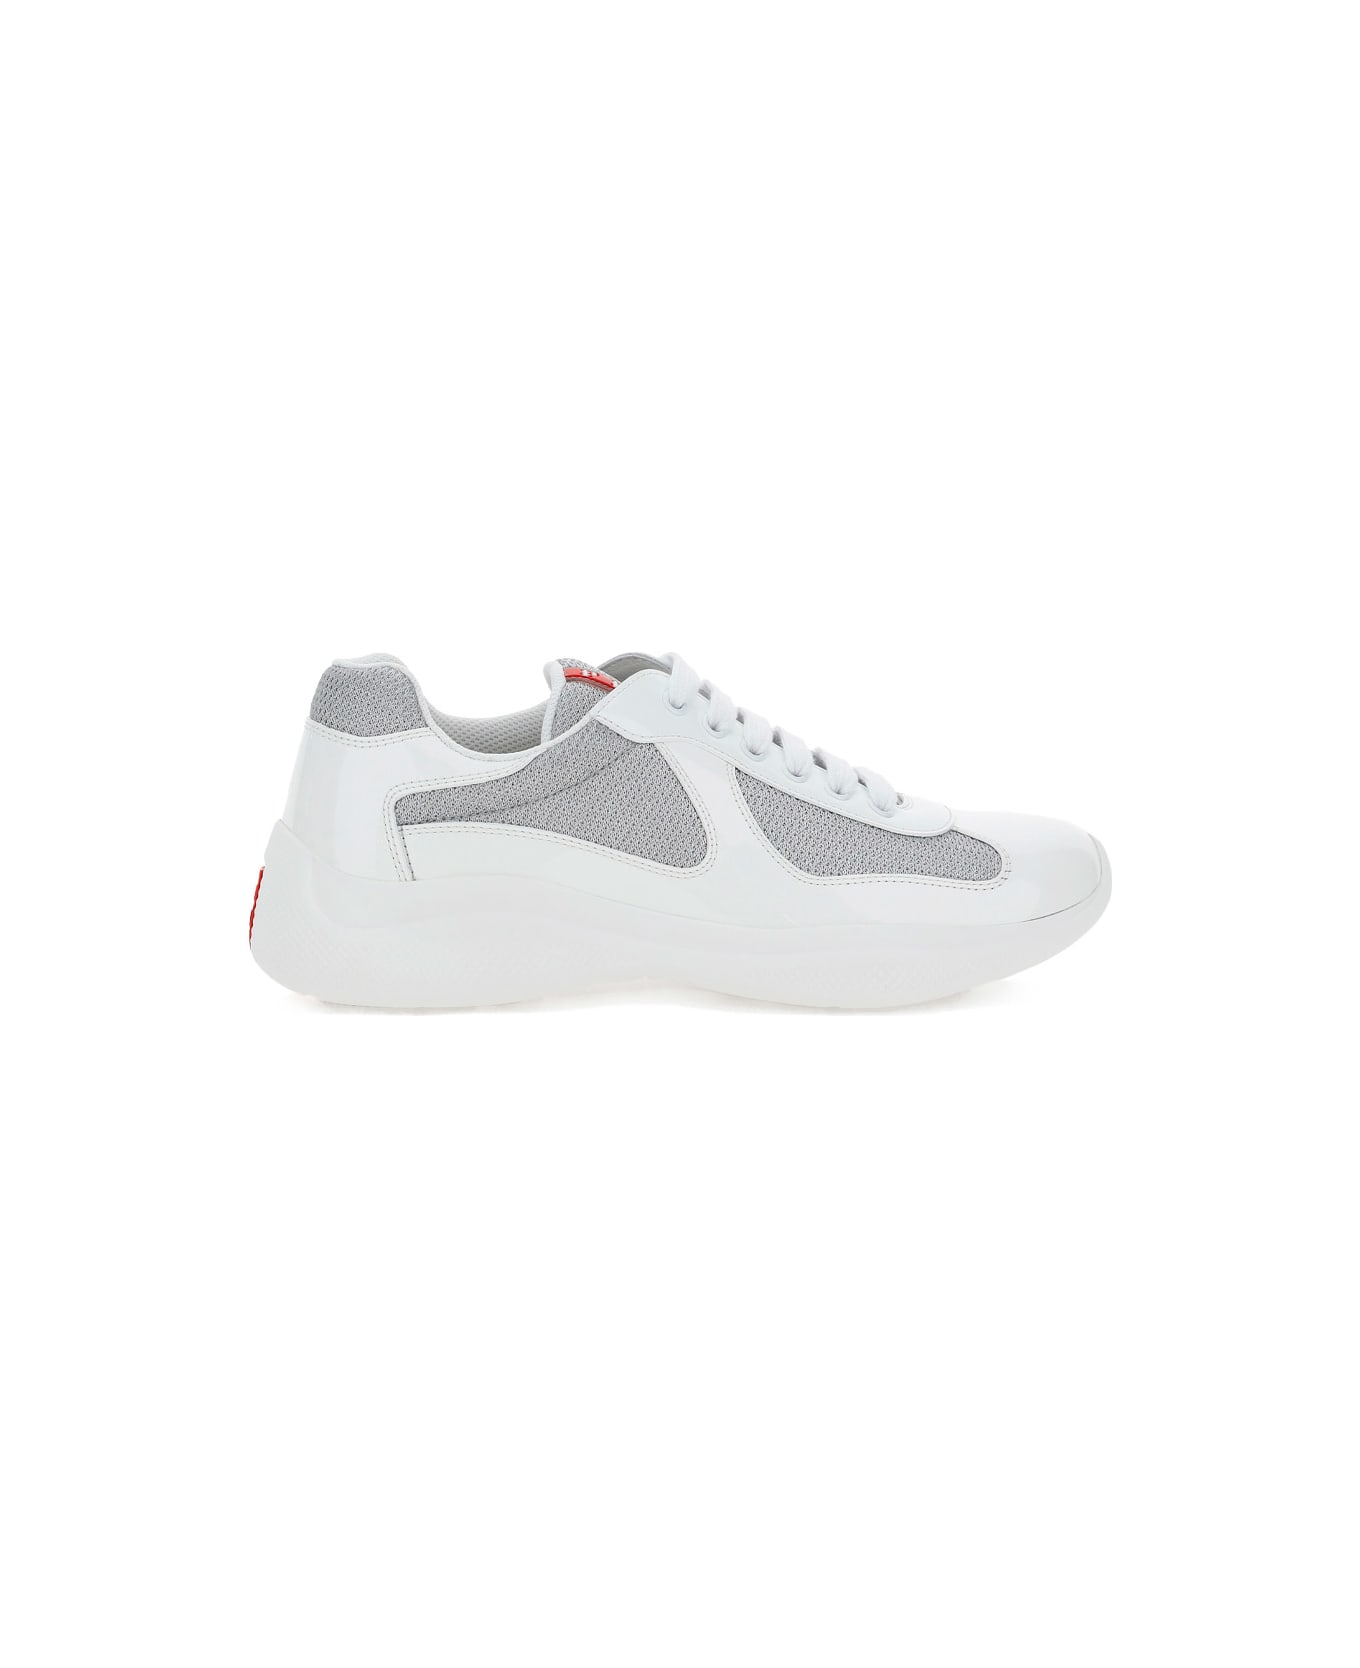 Prada New America's Cup Sneakers - Off White